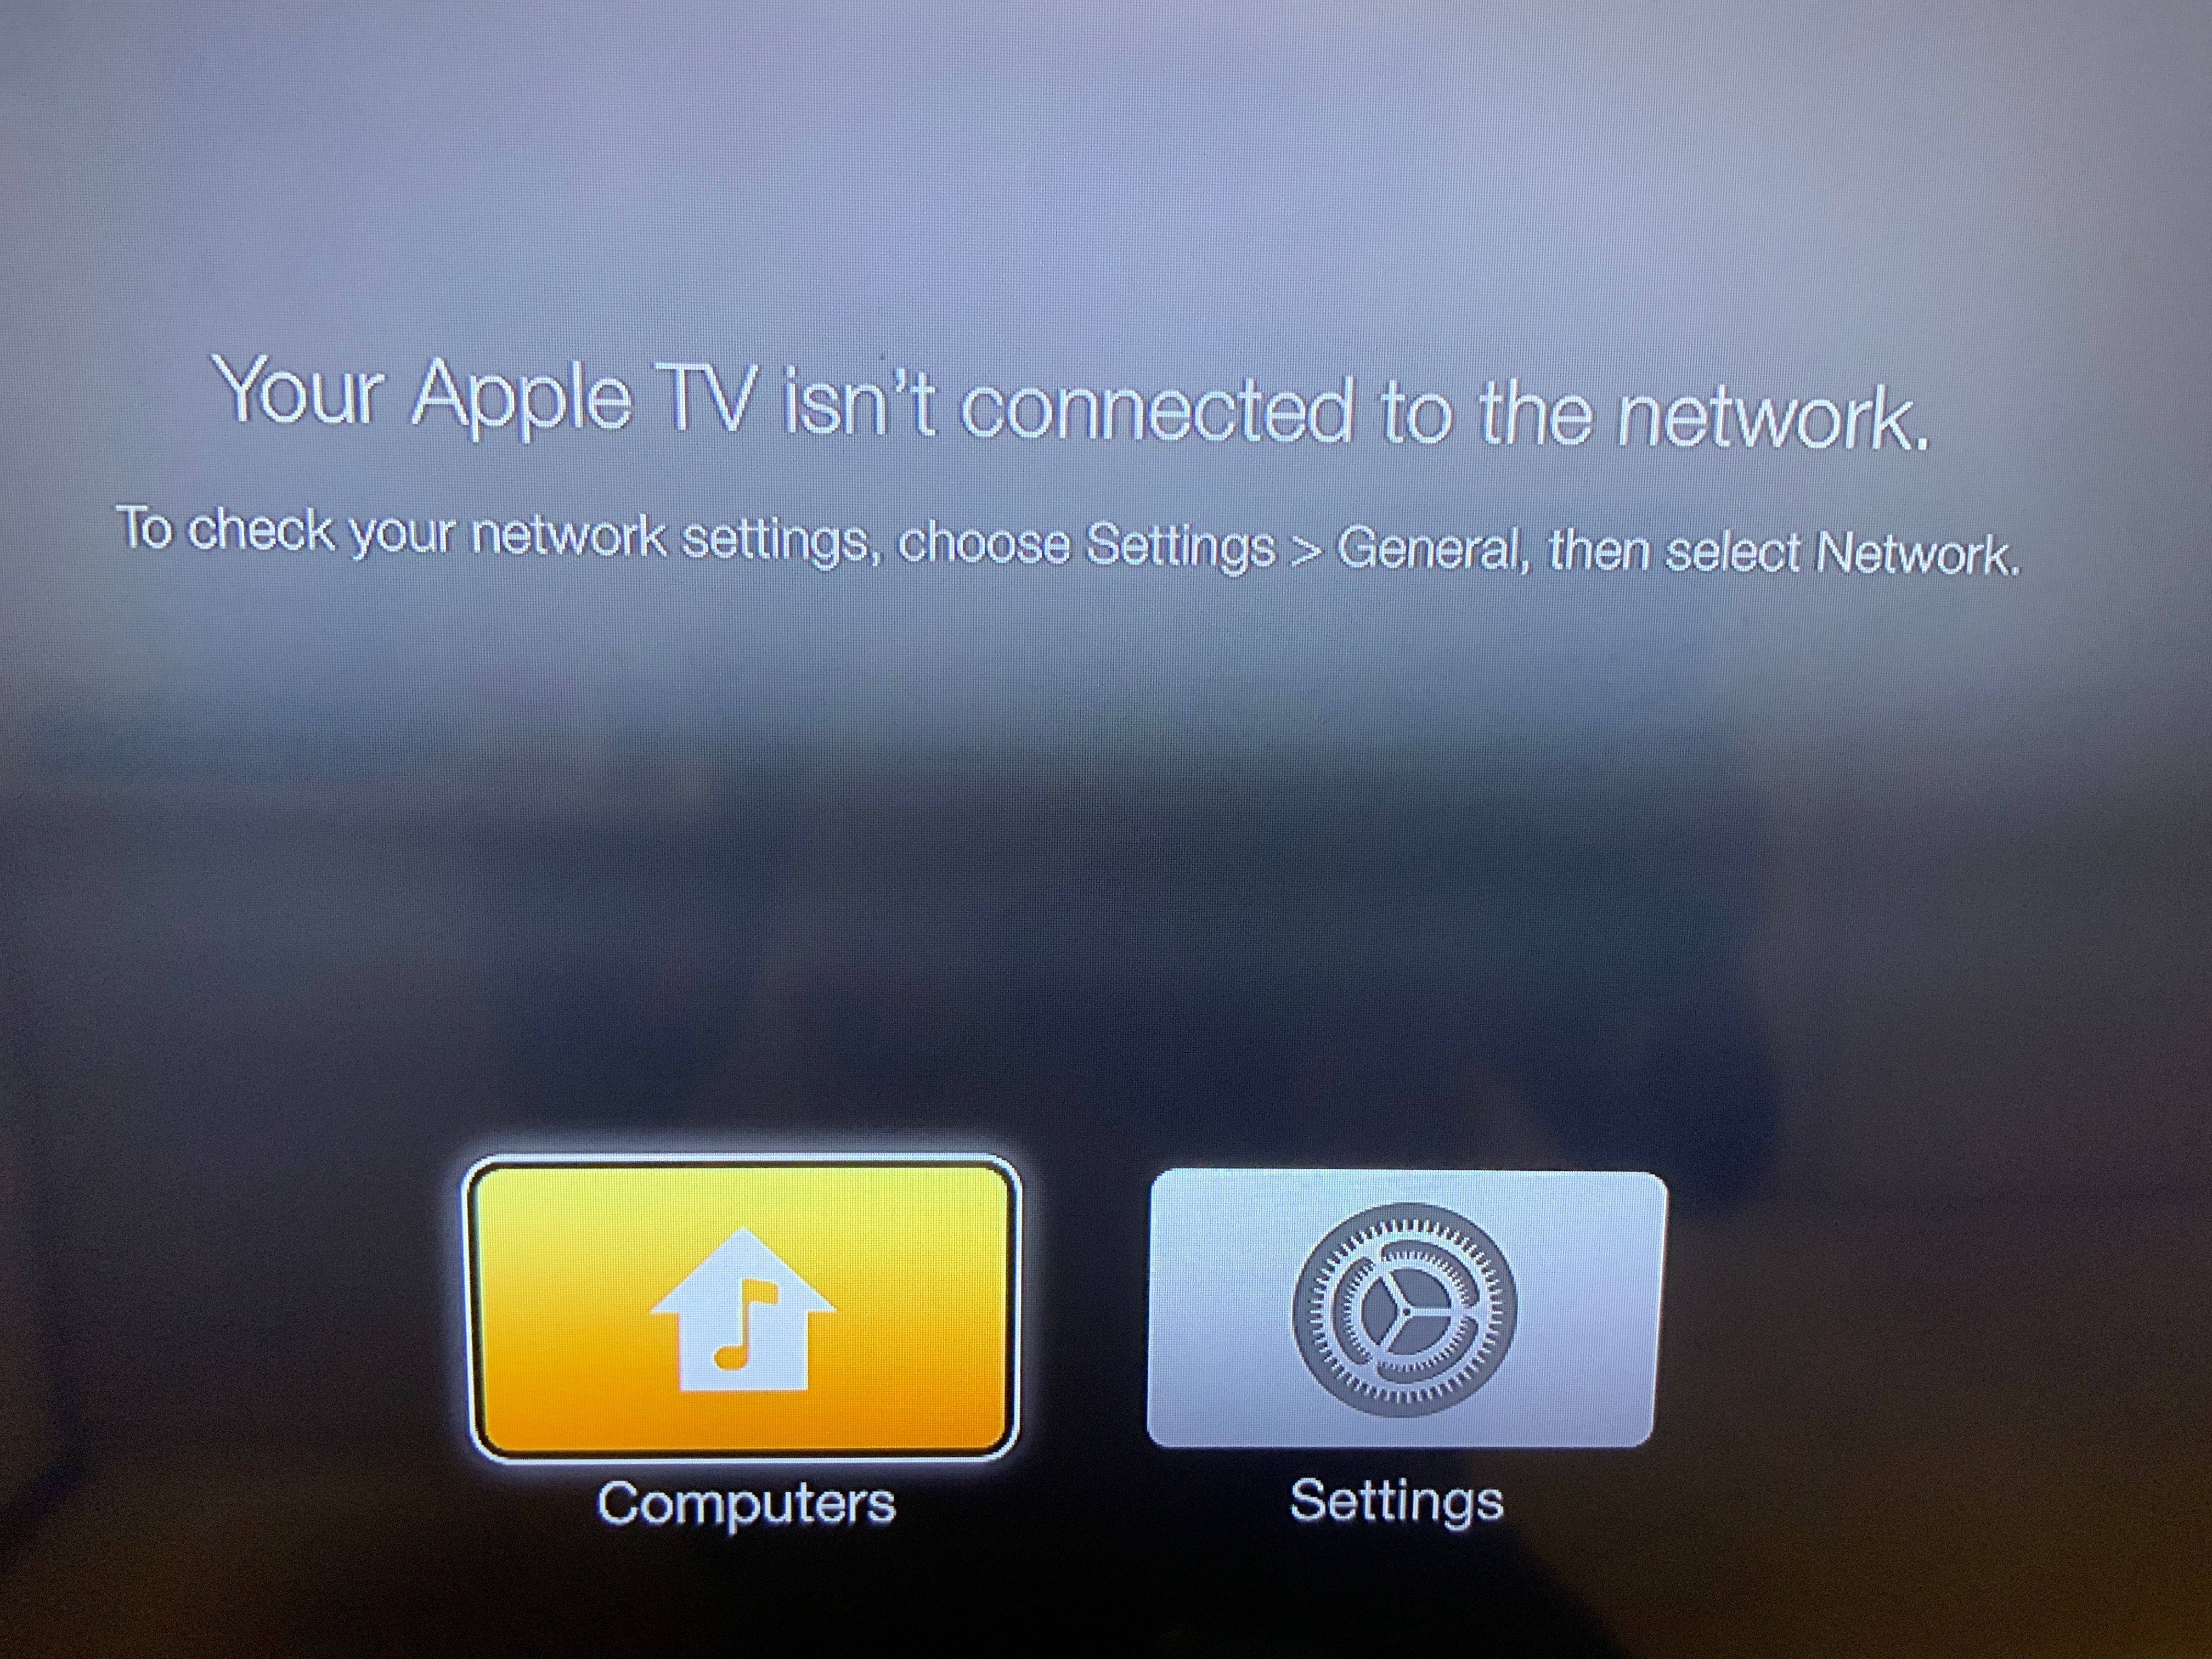 Putte Urskive Penneven My Apple TV 3 gen is stuck on the “Your A… - Apple Community